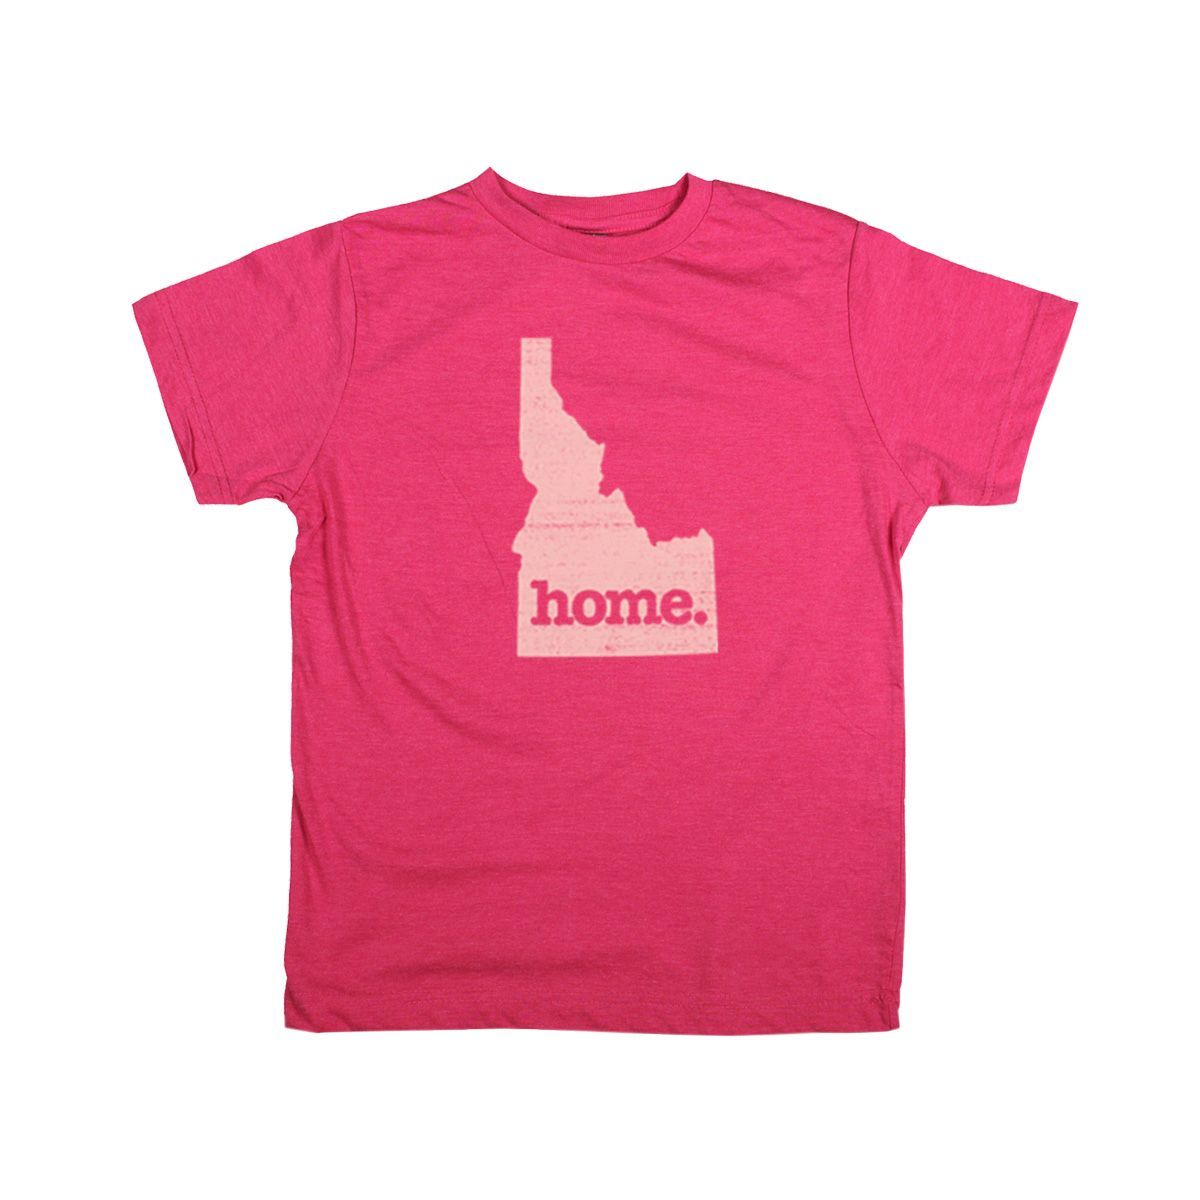 home. Youth/Toddler T-Shirt - St Croix